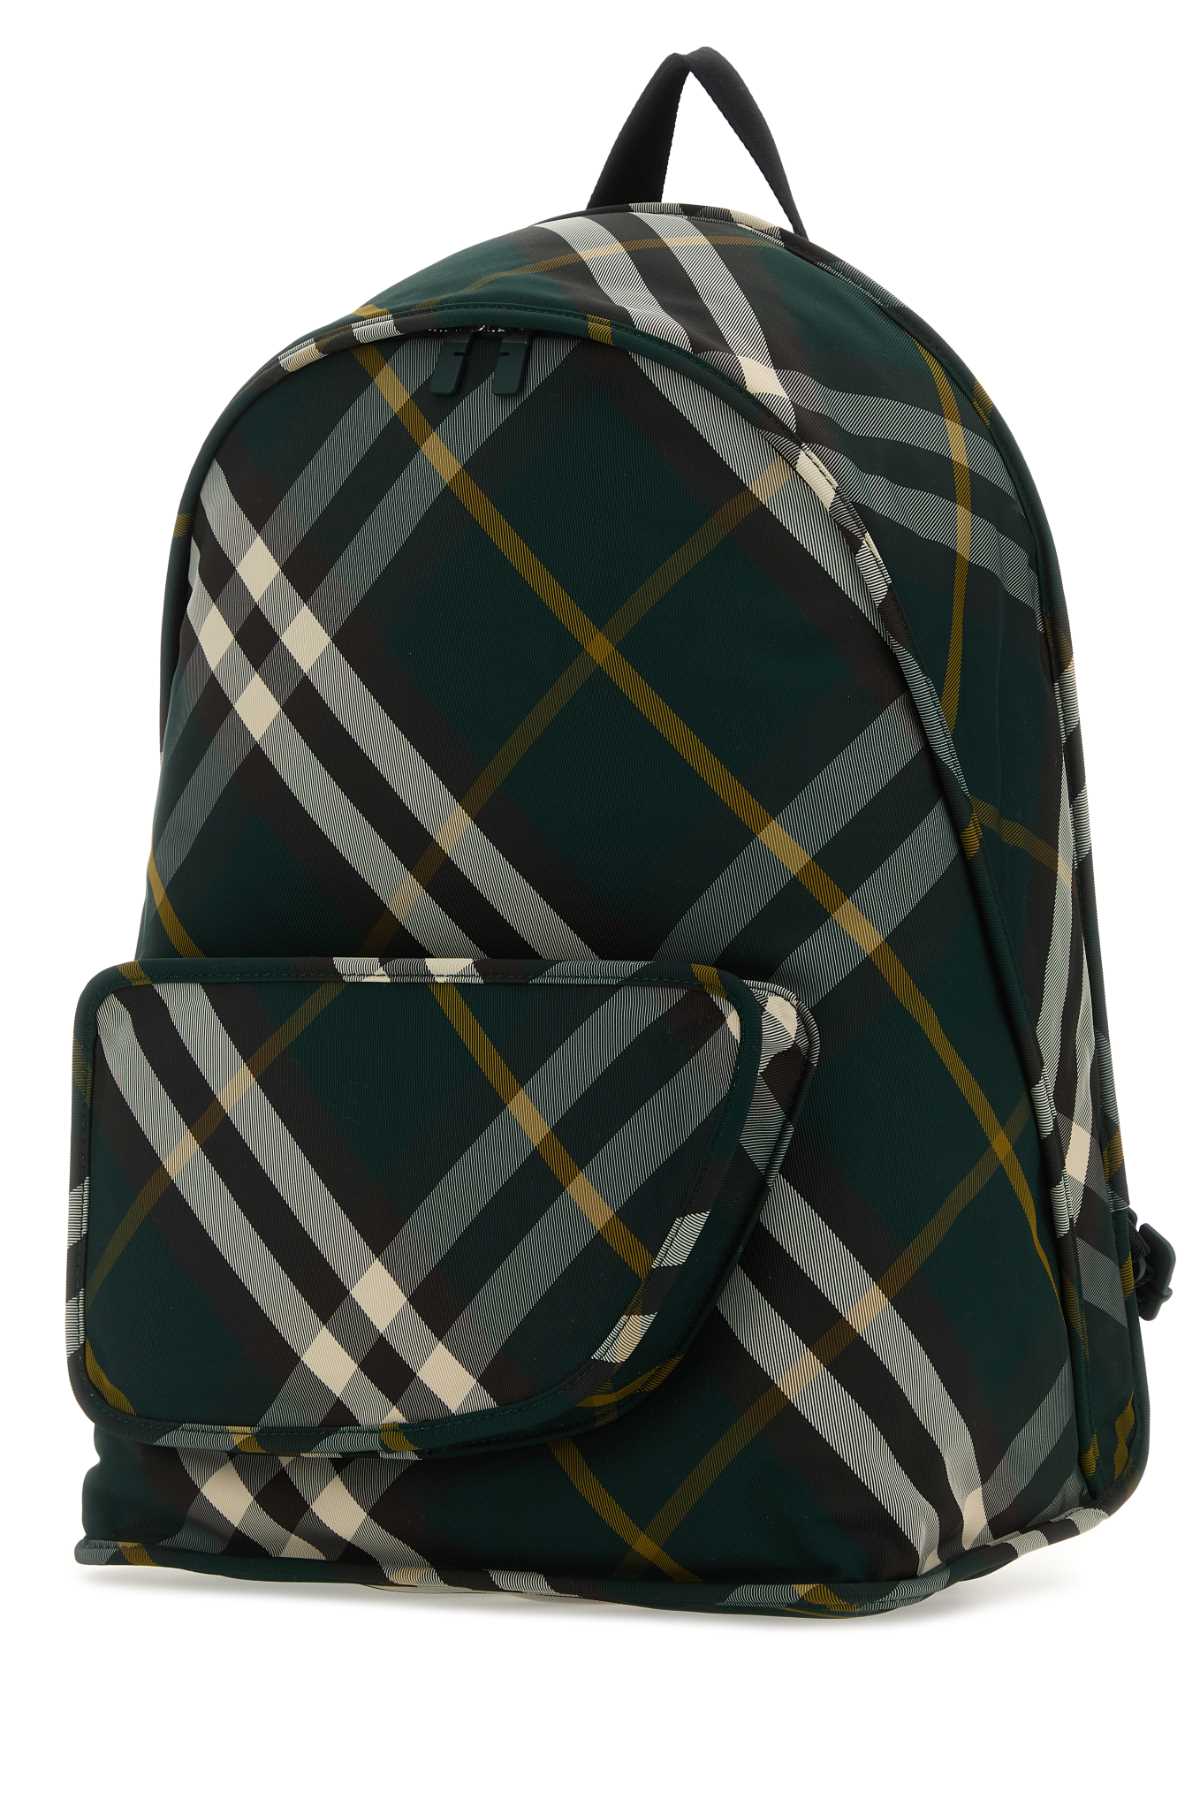 Burberry Printed Nylon Shield Backpack In Ivy